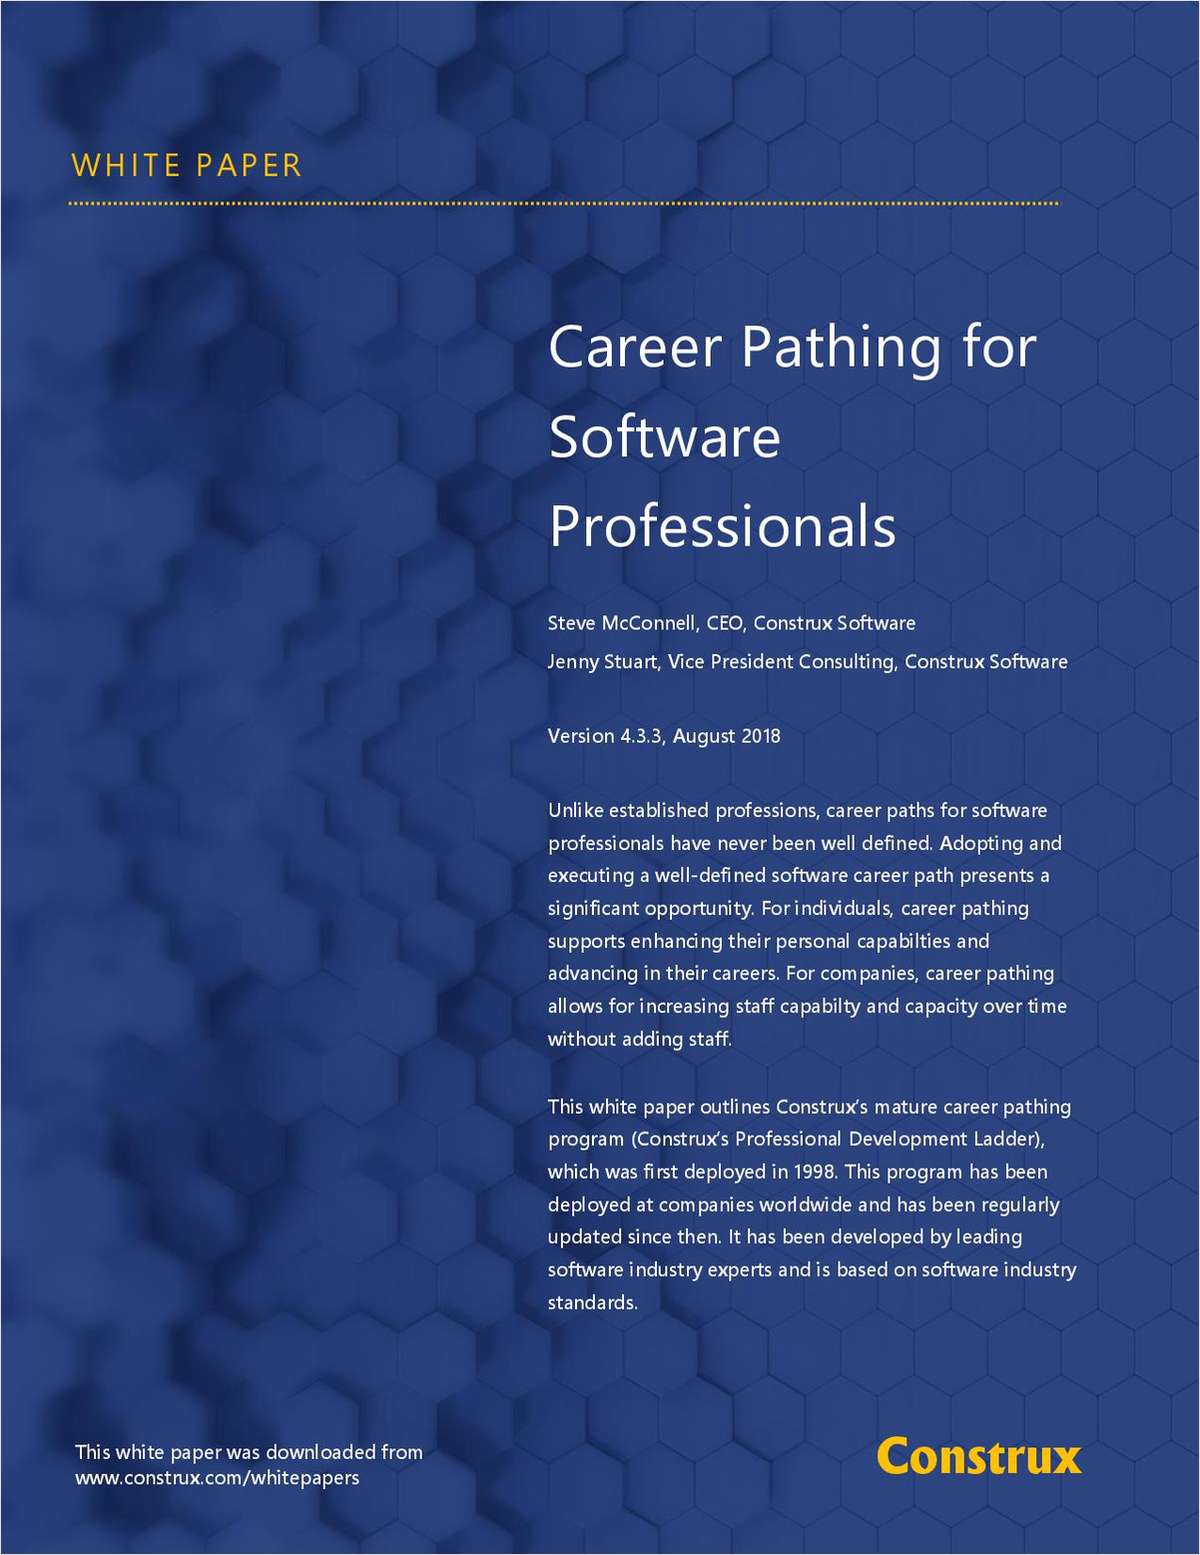 Career Pathing for Software Professionals